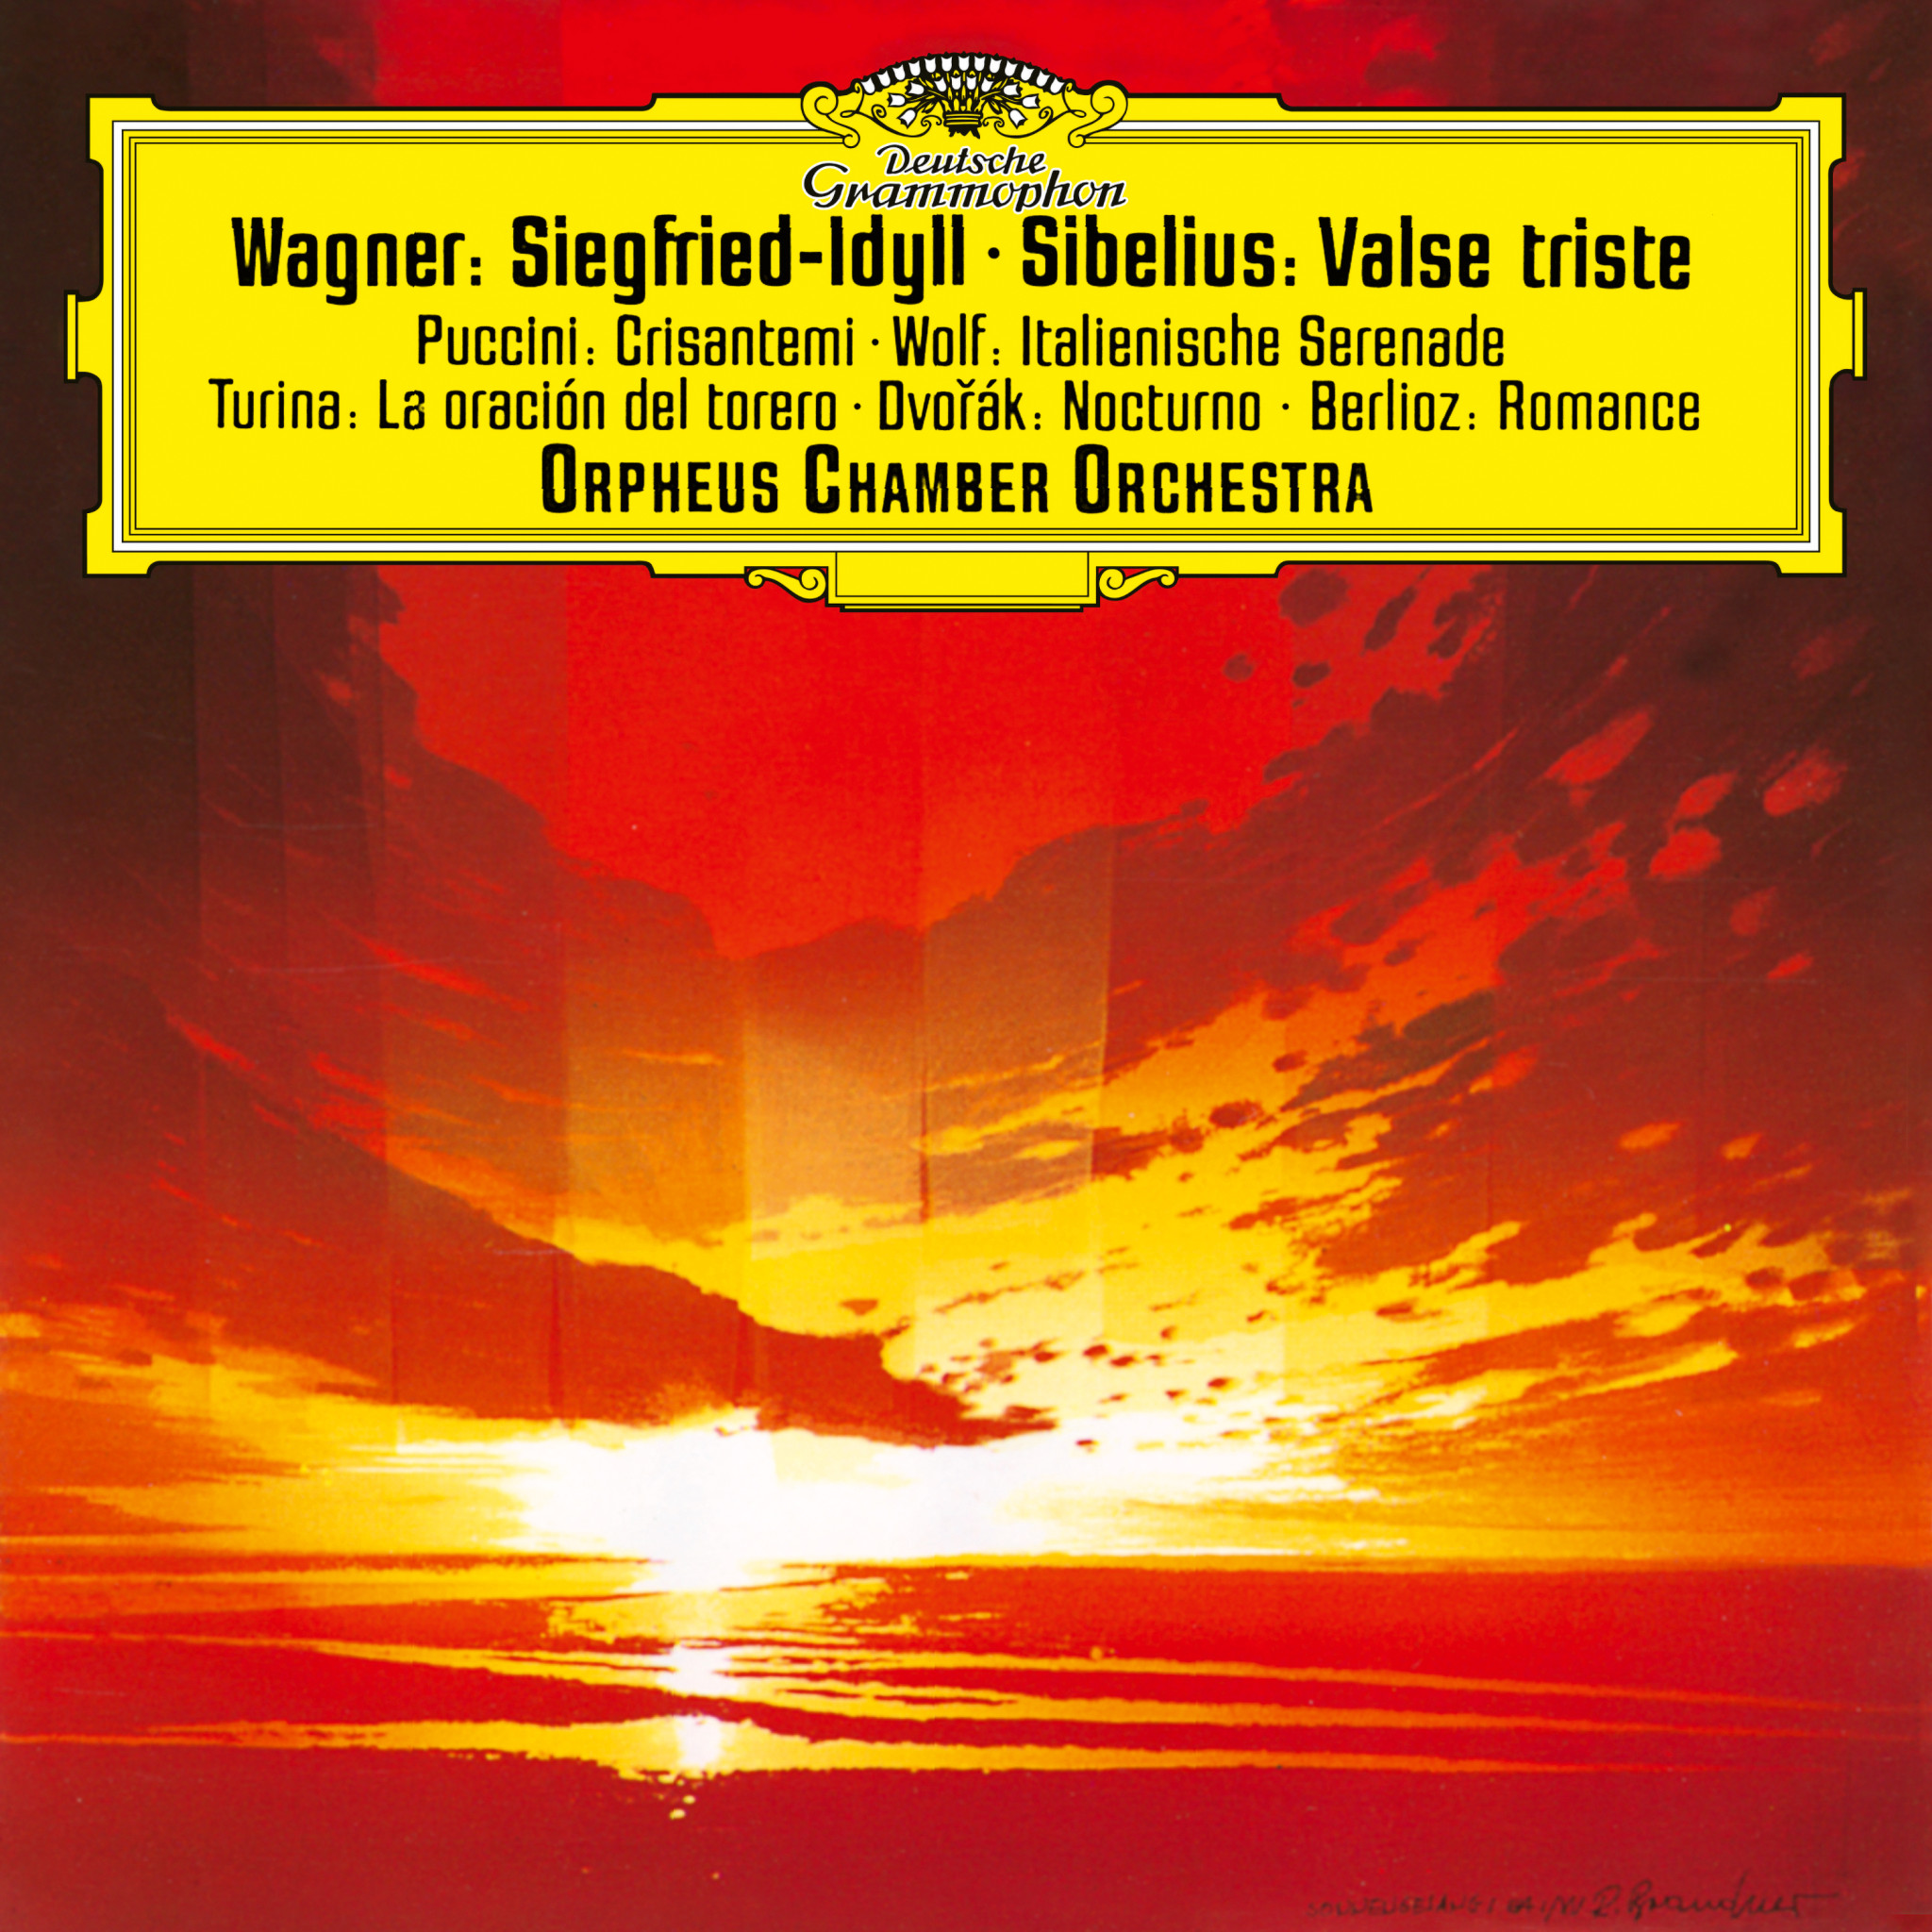 Orpheus Chamber Orchestra - Wagner: Siegfried Idyll eAlbum Cover